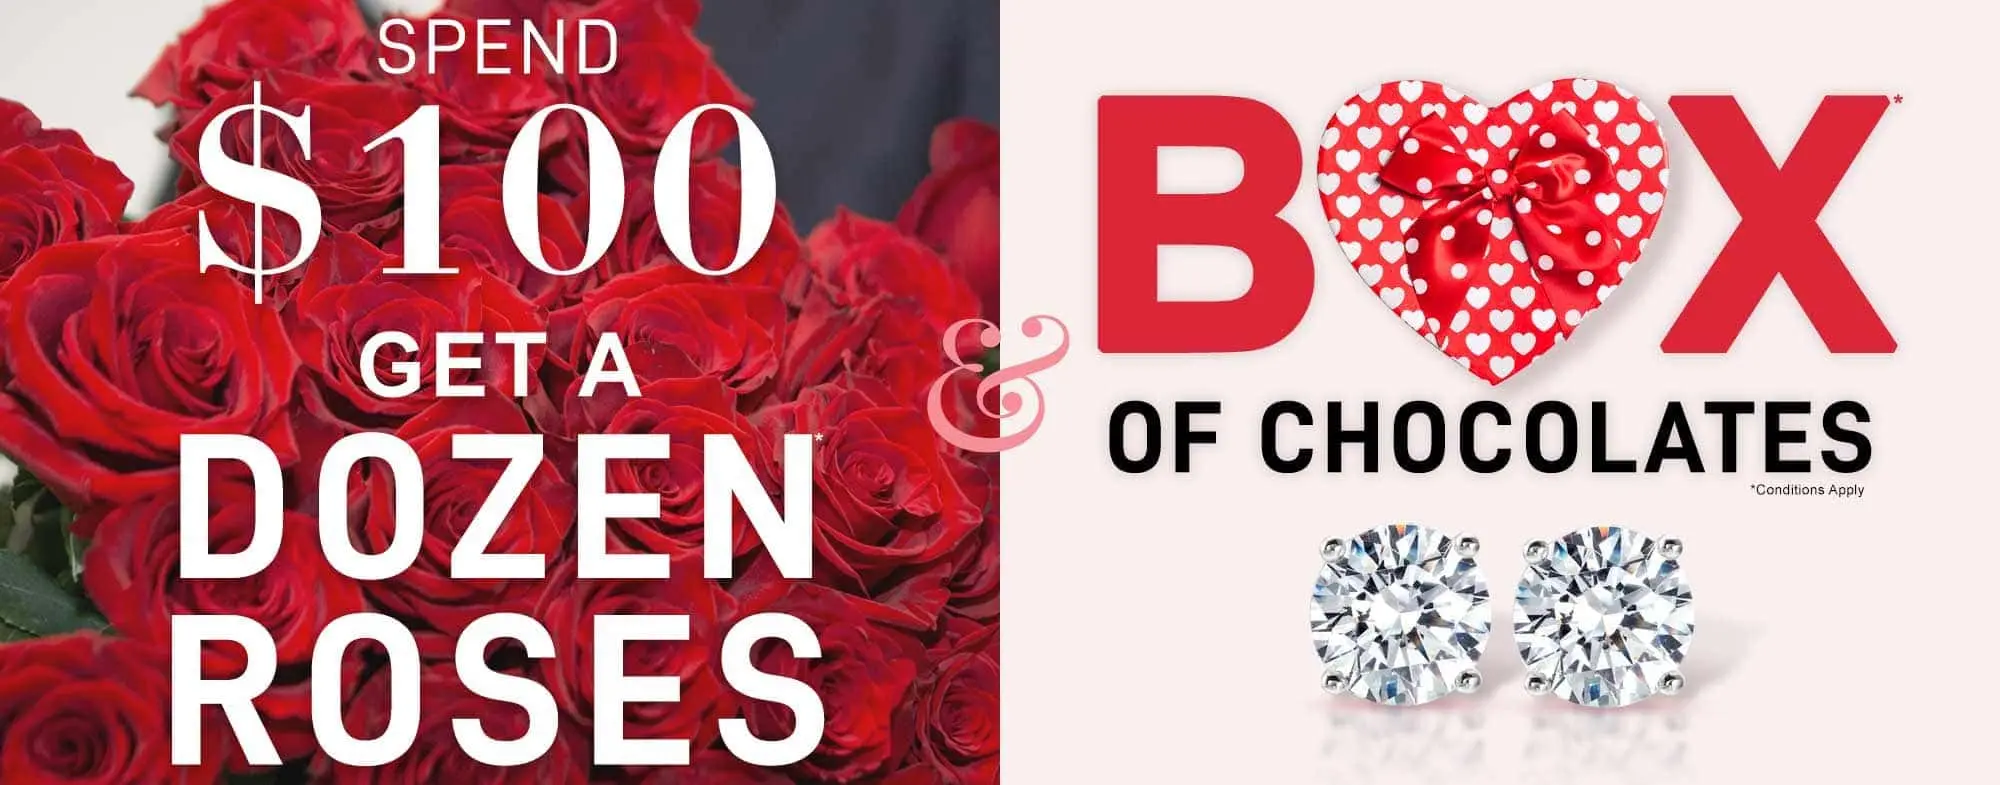 Free Roses and Chocolates at Carters Jewelers